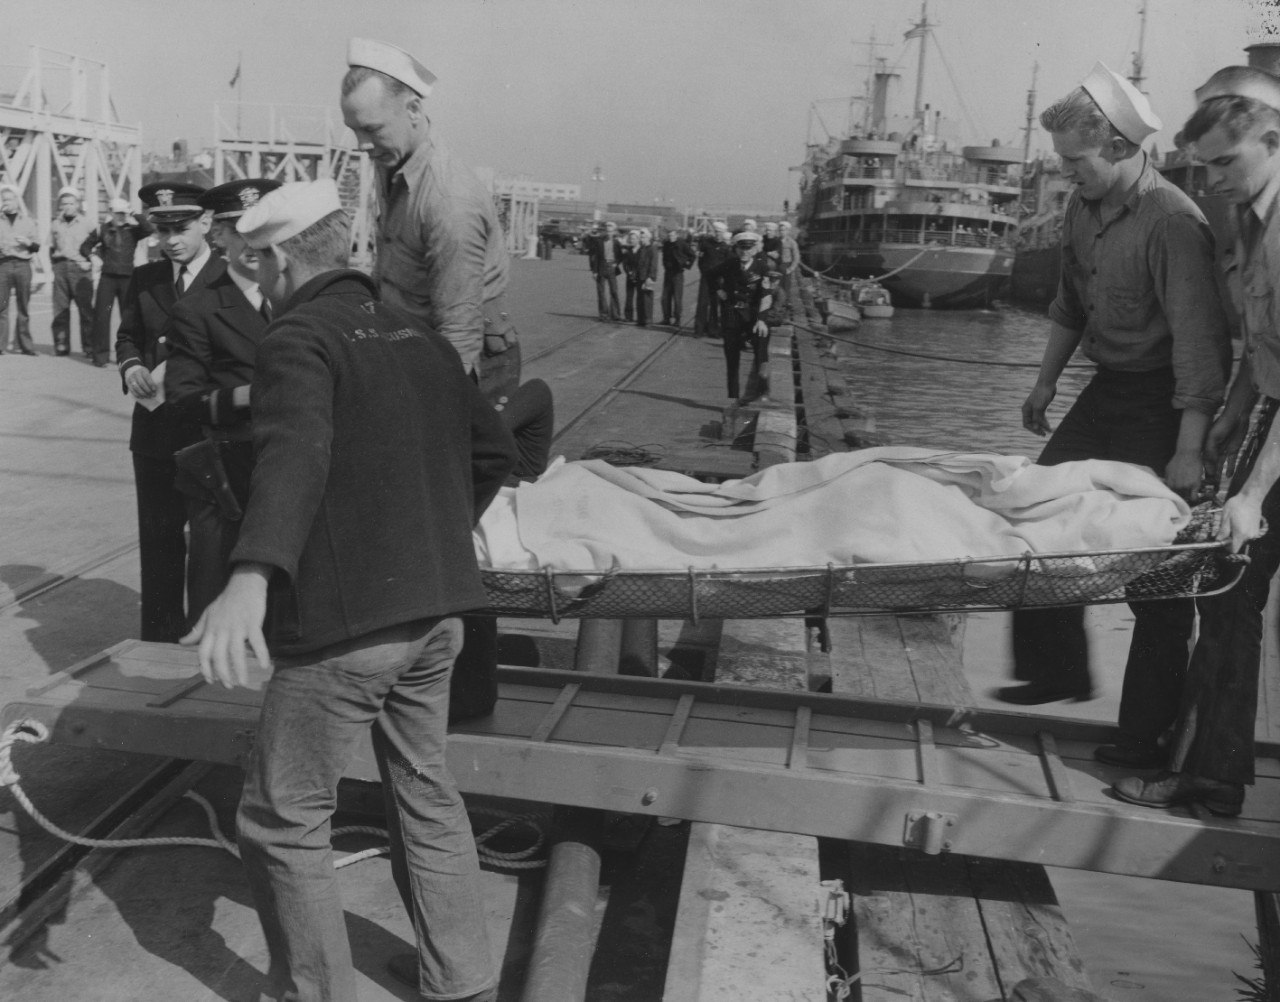 An injured survivor from City of New York is carried on a stretcher by members of Acushnet’s ship’s company (note U.S.S. ACUSHNET stenciled on the back of the coat of the sailor in left foreground), Pier 7, NOB Norfolk, 1 April 1942. Note interes...